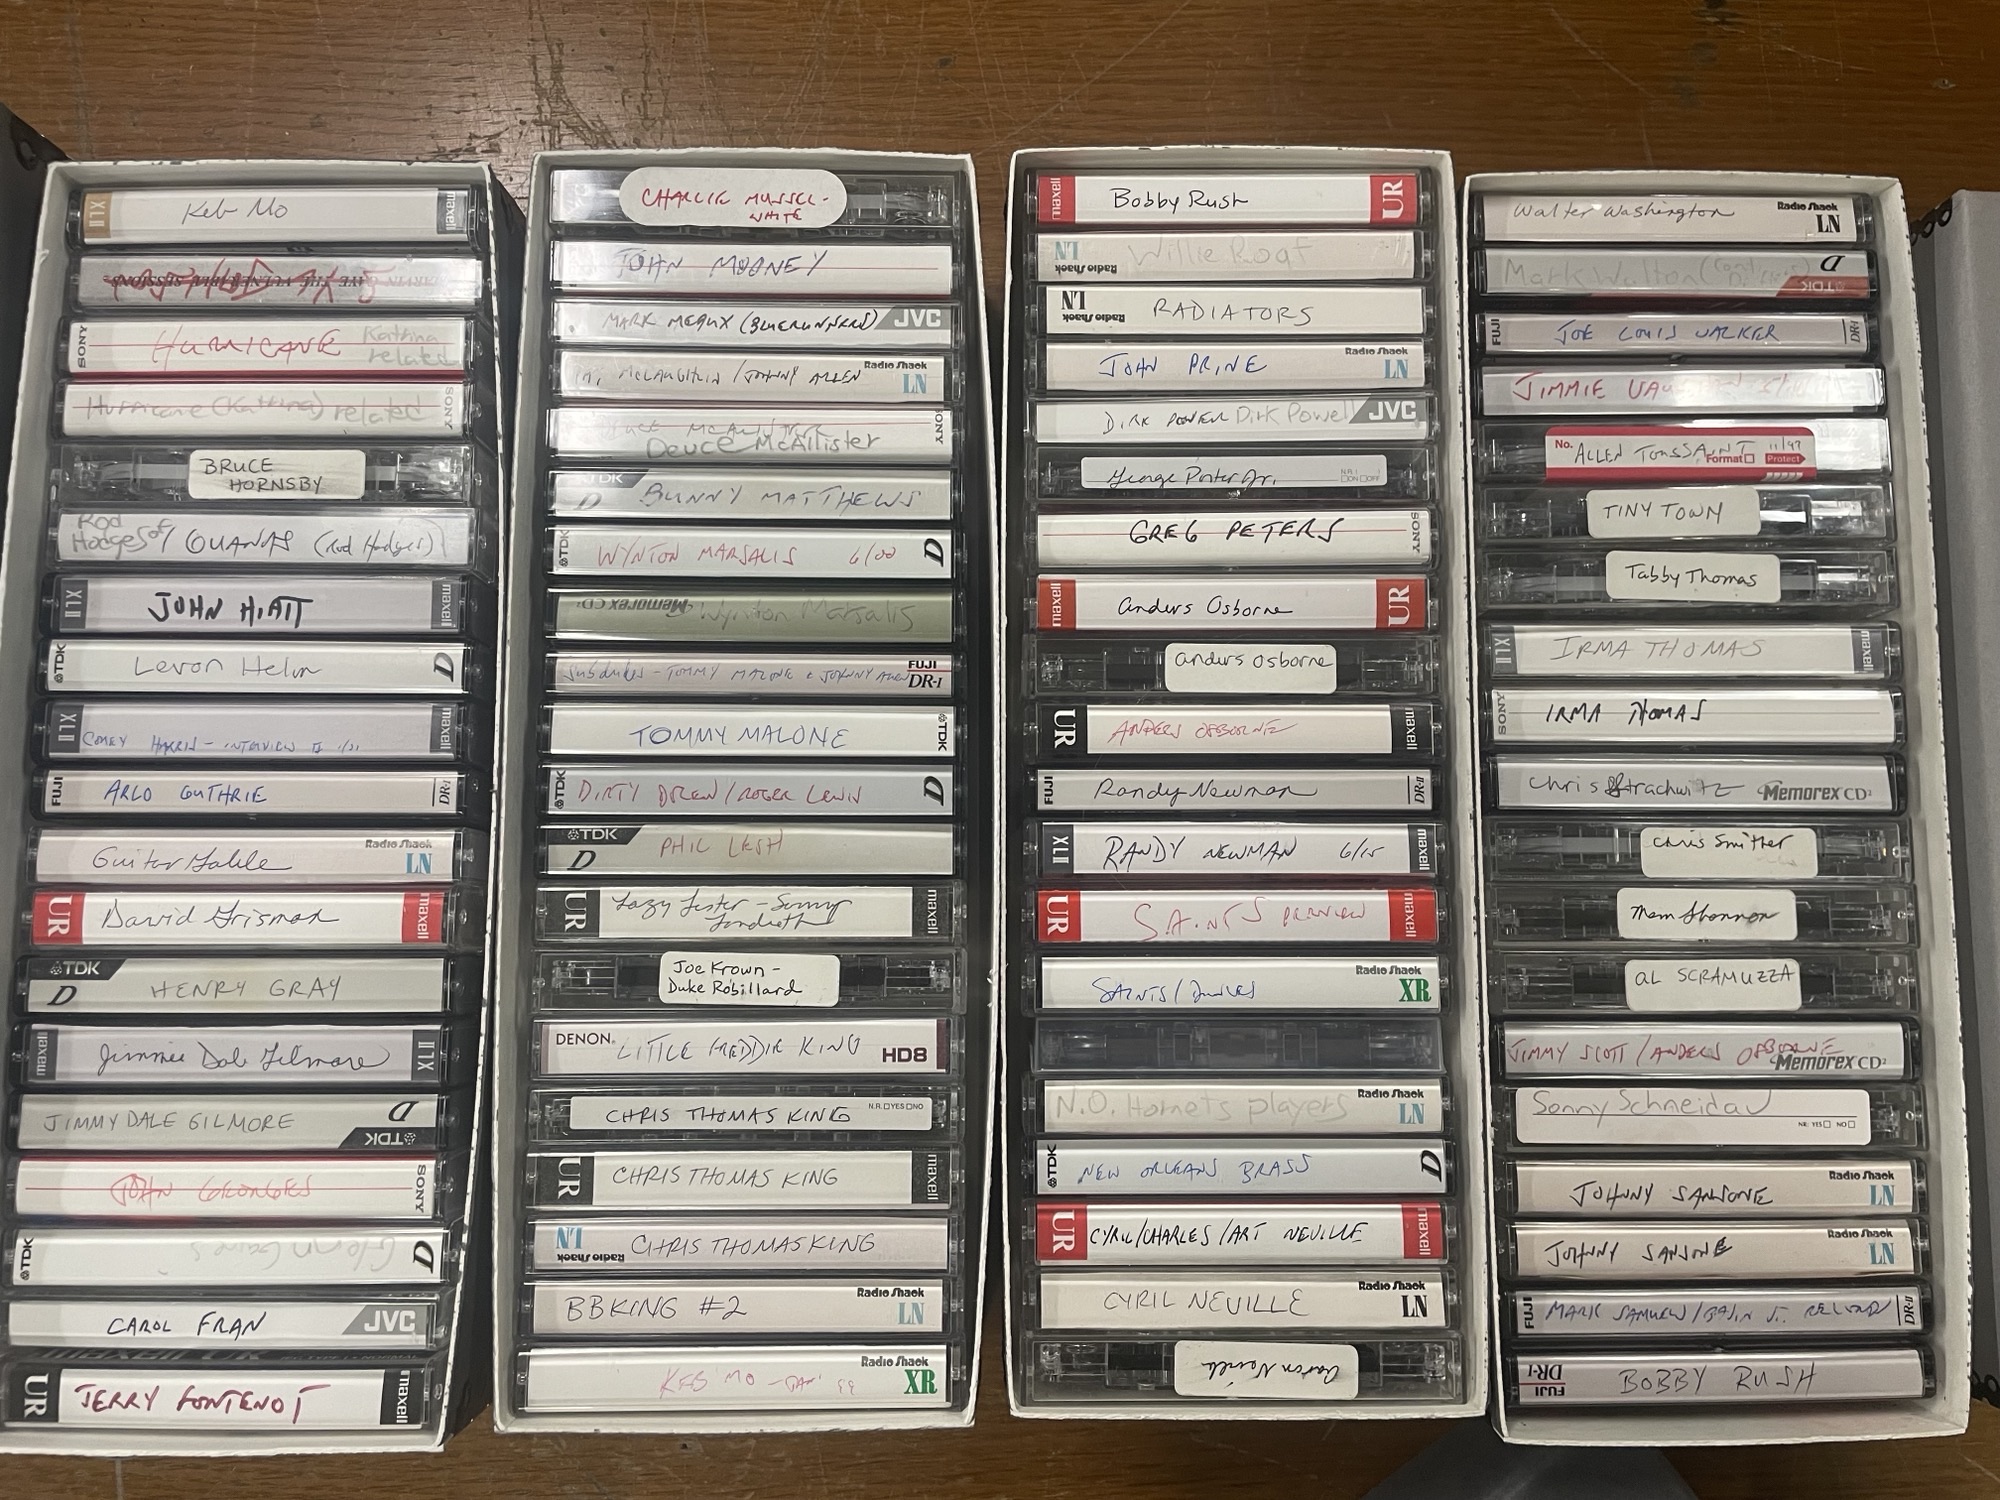 Cassettes (detail) from the Scott Jordan interview collection, HJA-099, Tulane University Special Collections.